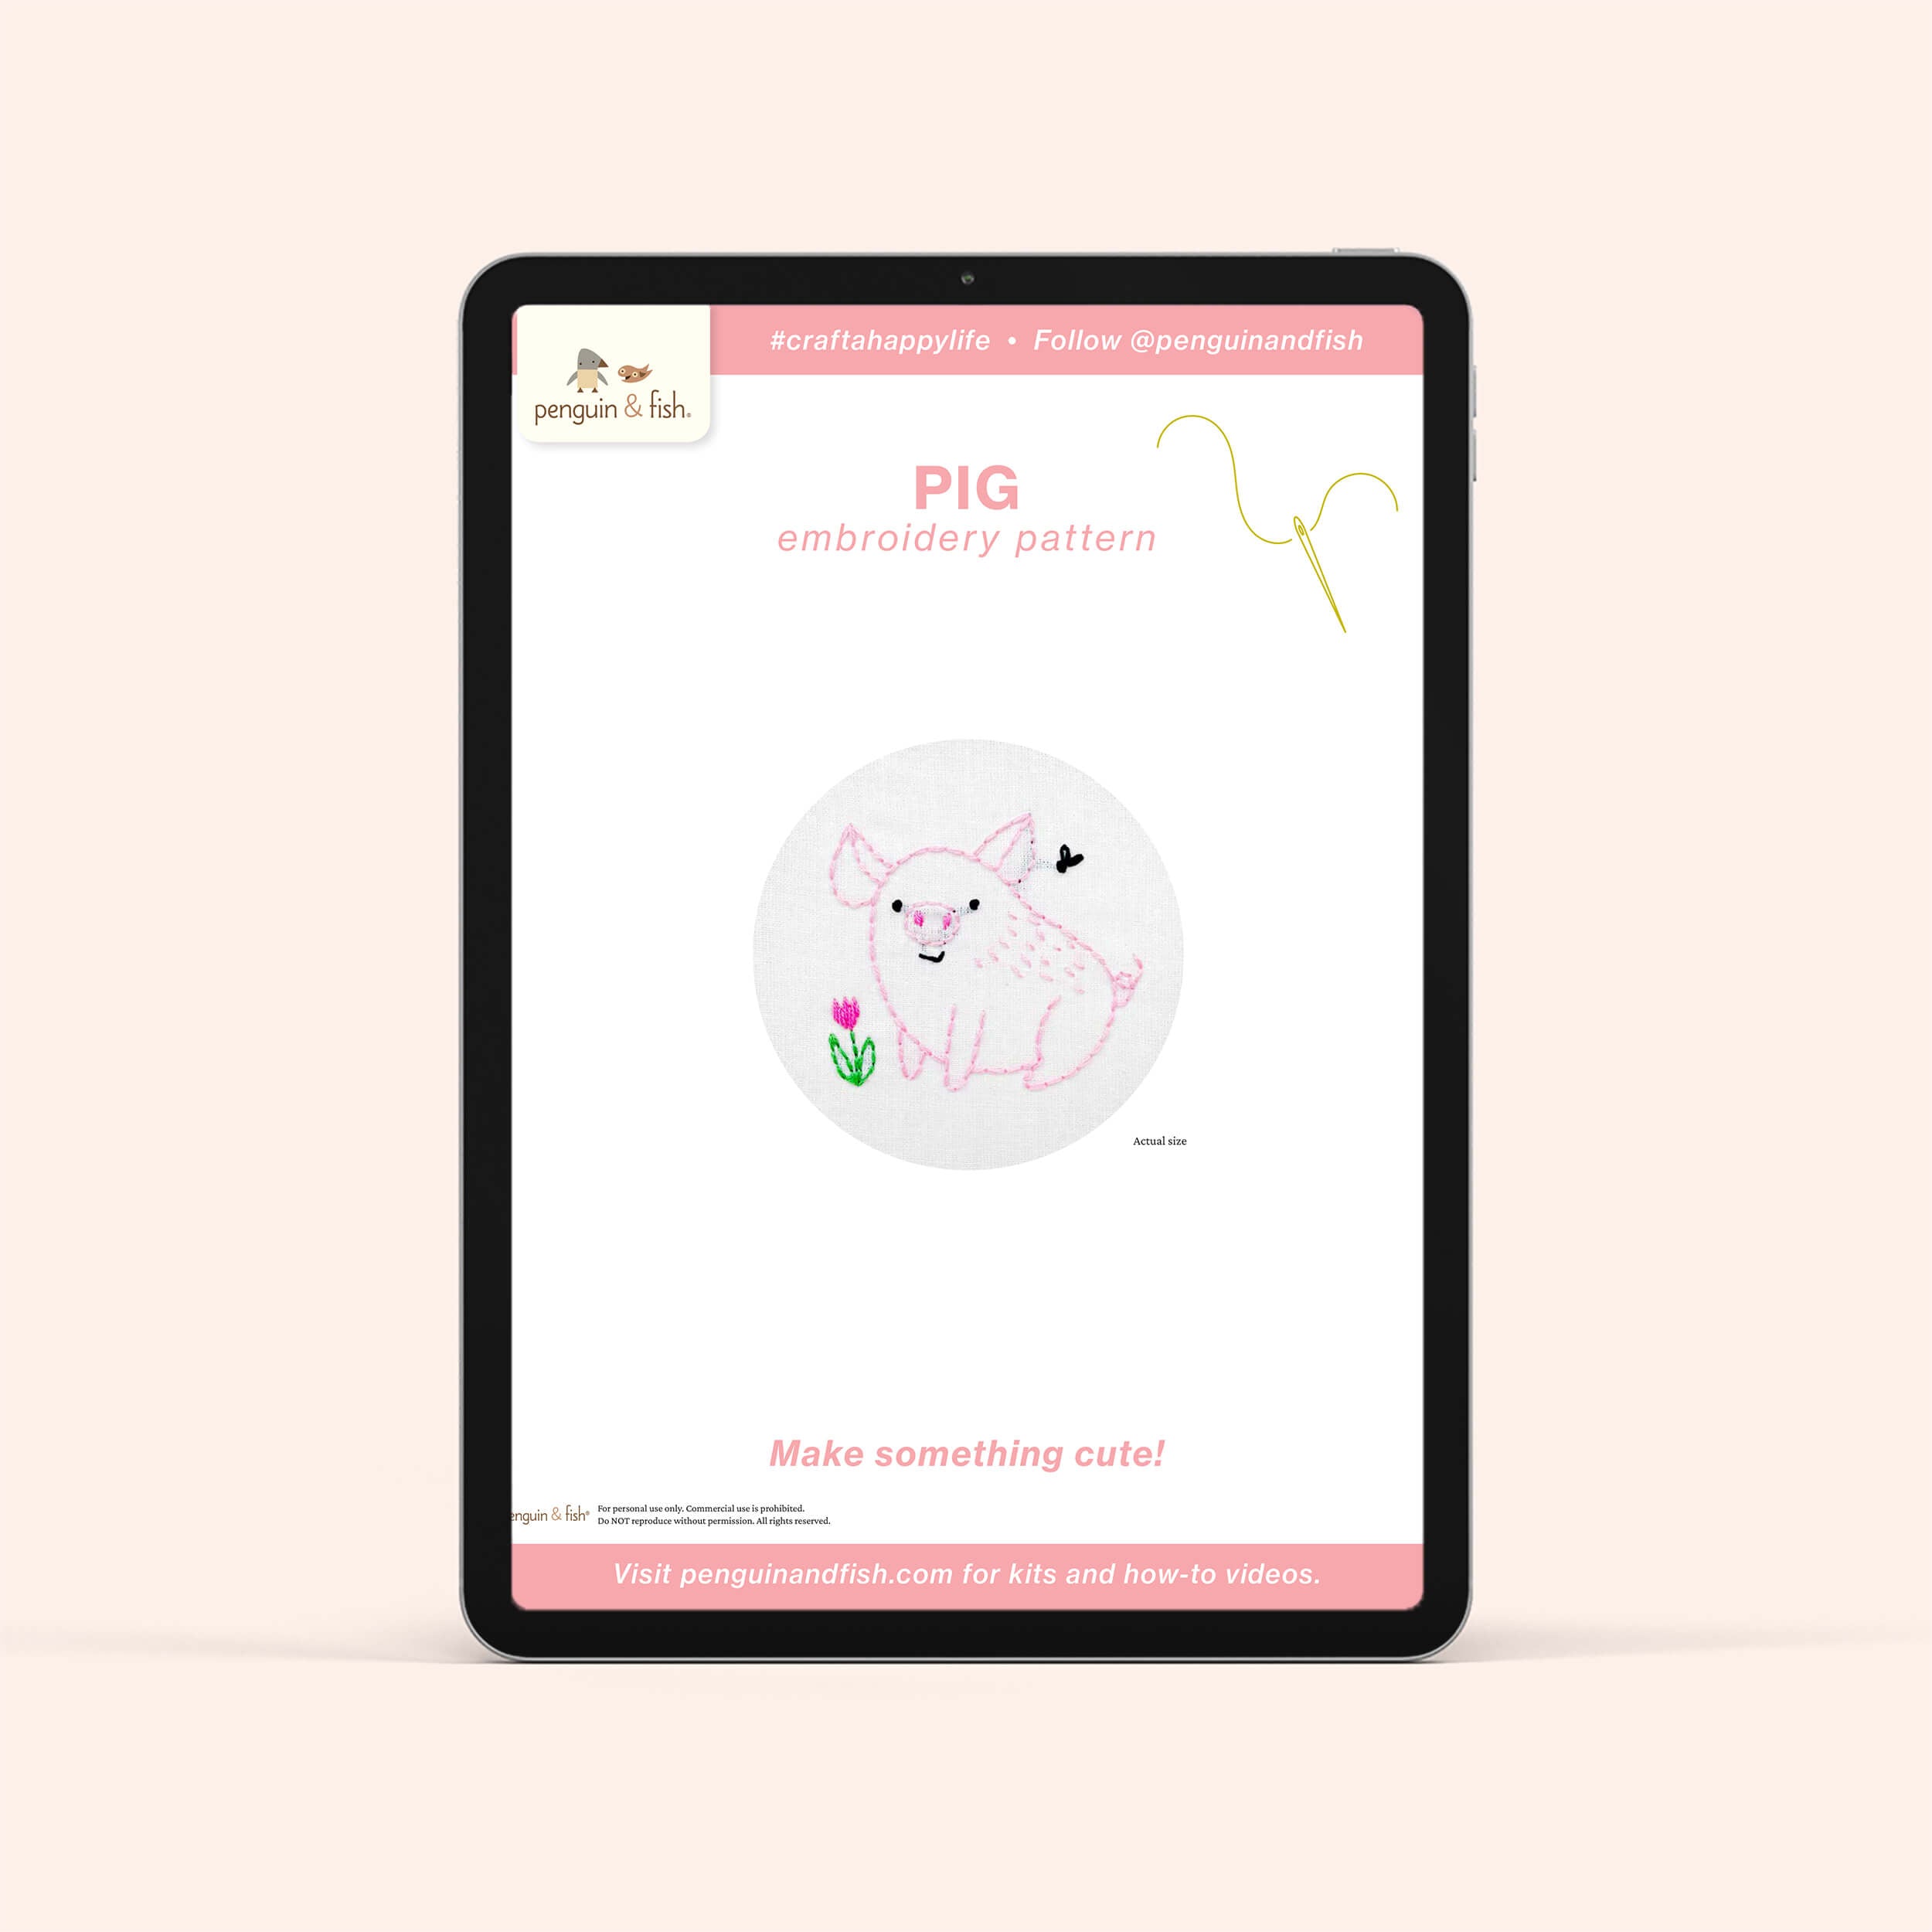 Pig PDF embroidery pattern shown on a tablet